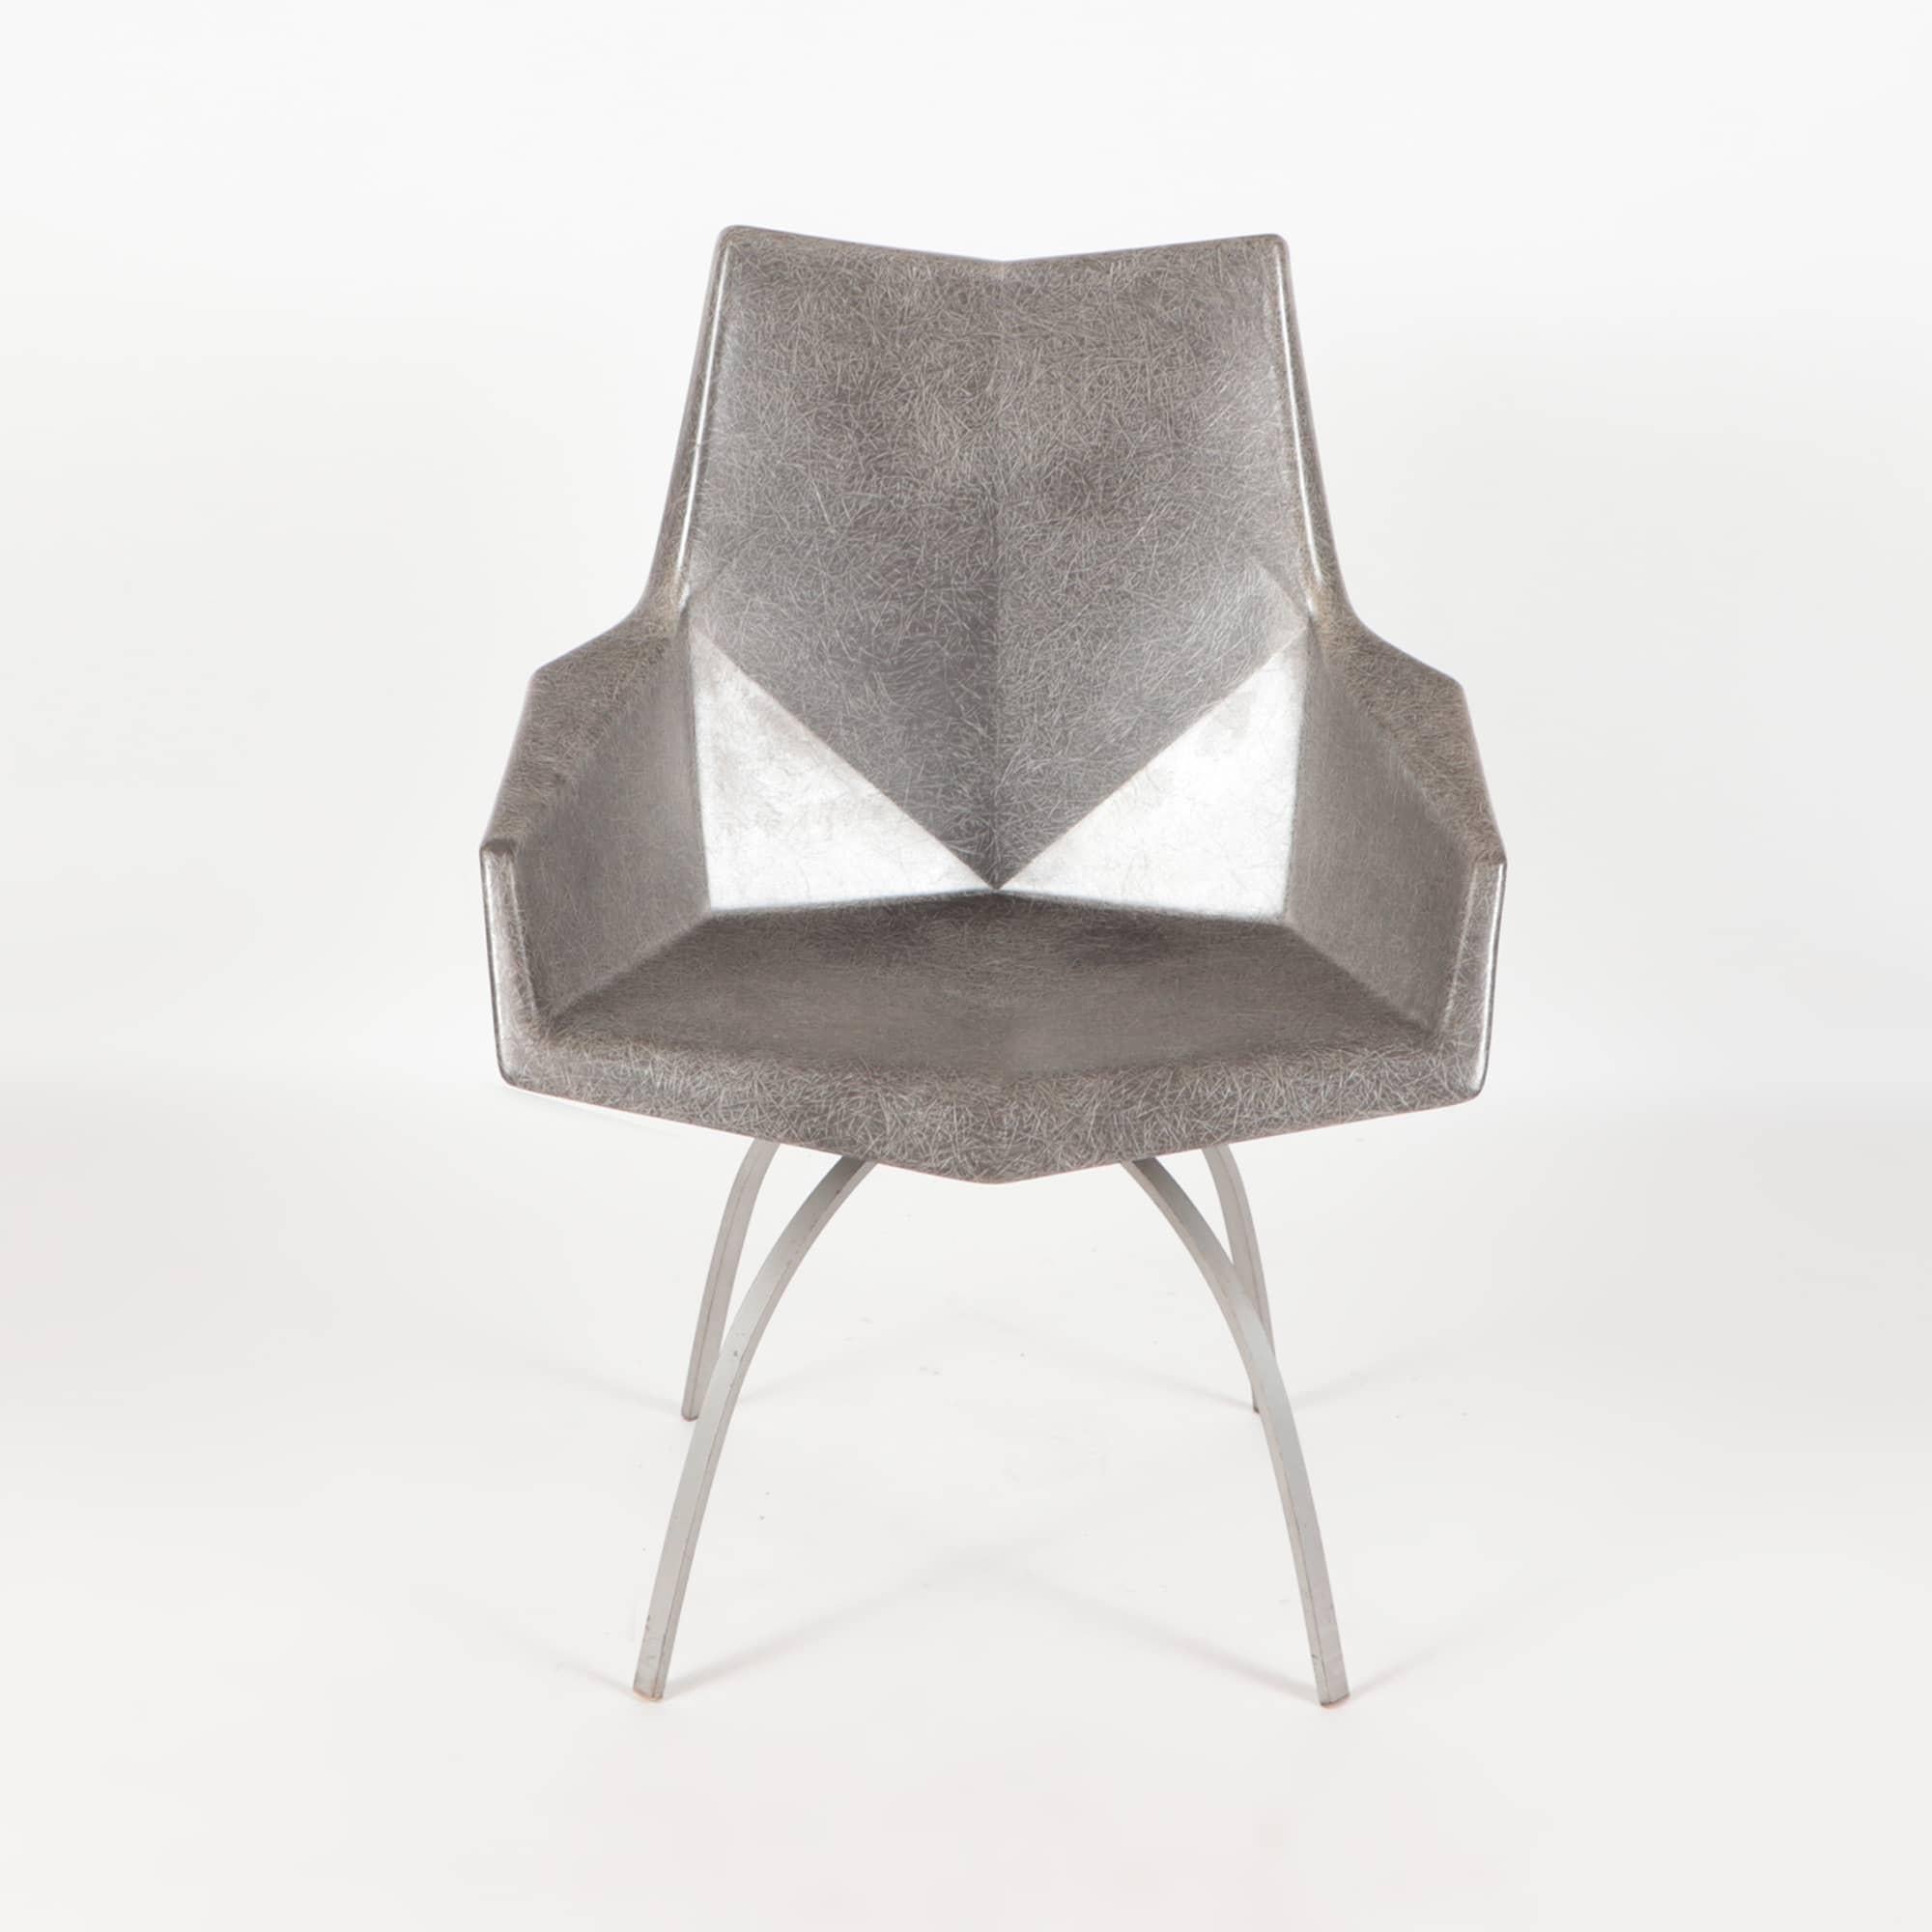 Designed in 1959 as the faceted form chair, Paul McCobb’s fiberglass seating has become known as the Origami Chair, its molded facets reminiscent of the Japanese art of paper folding. This one sits on a rarer spider base.